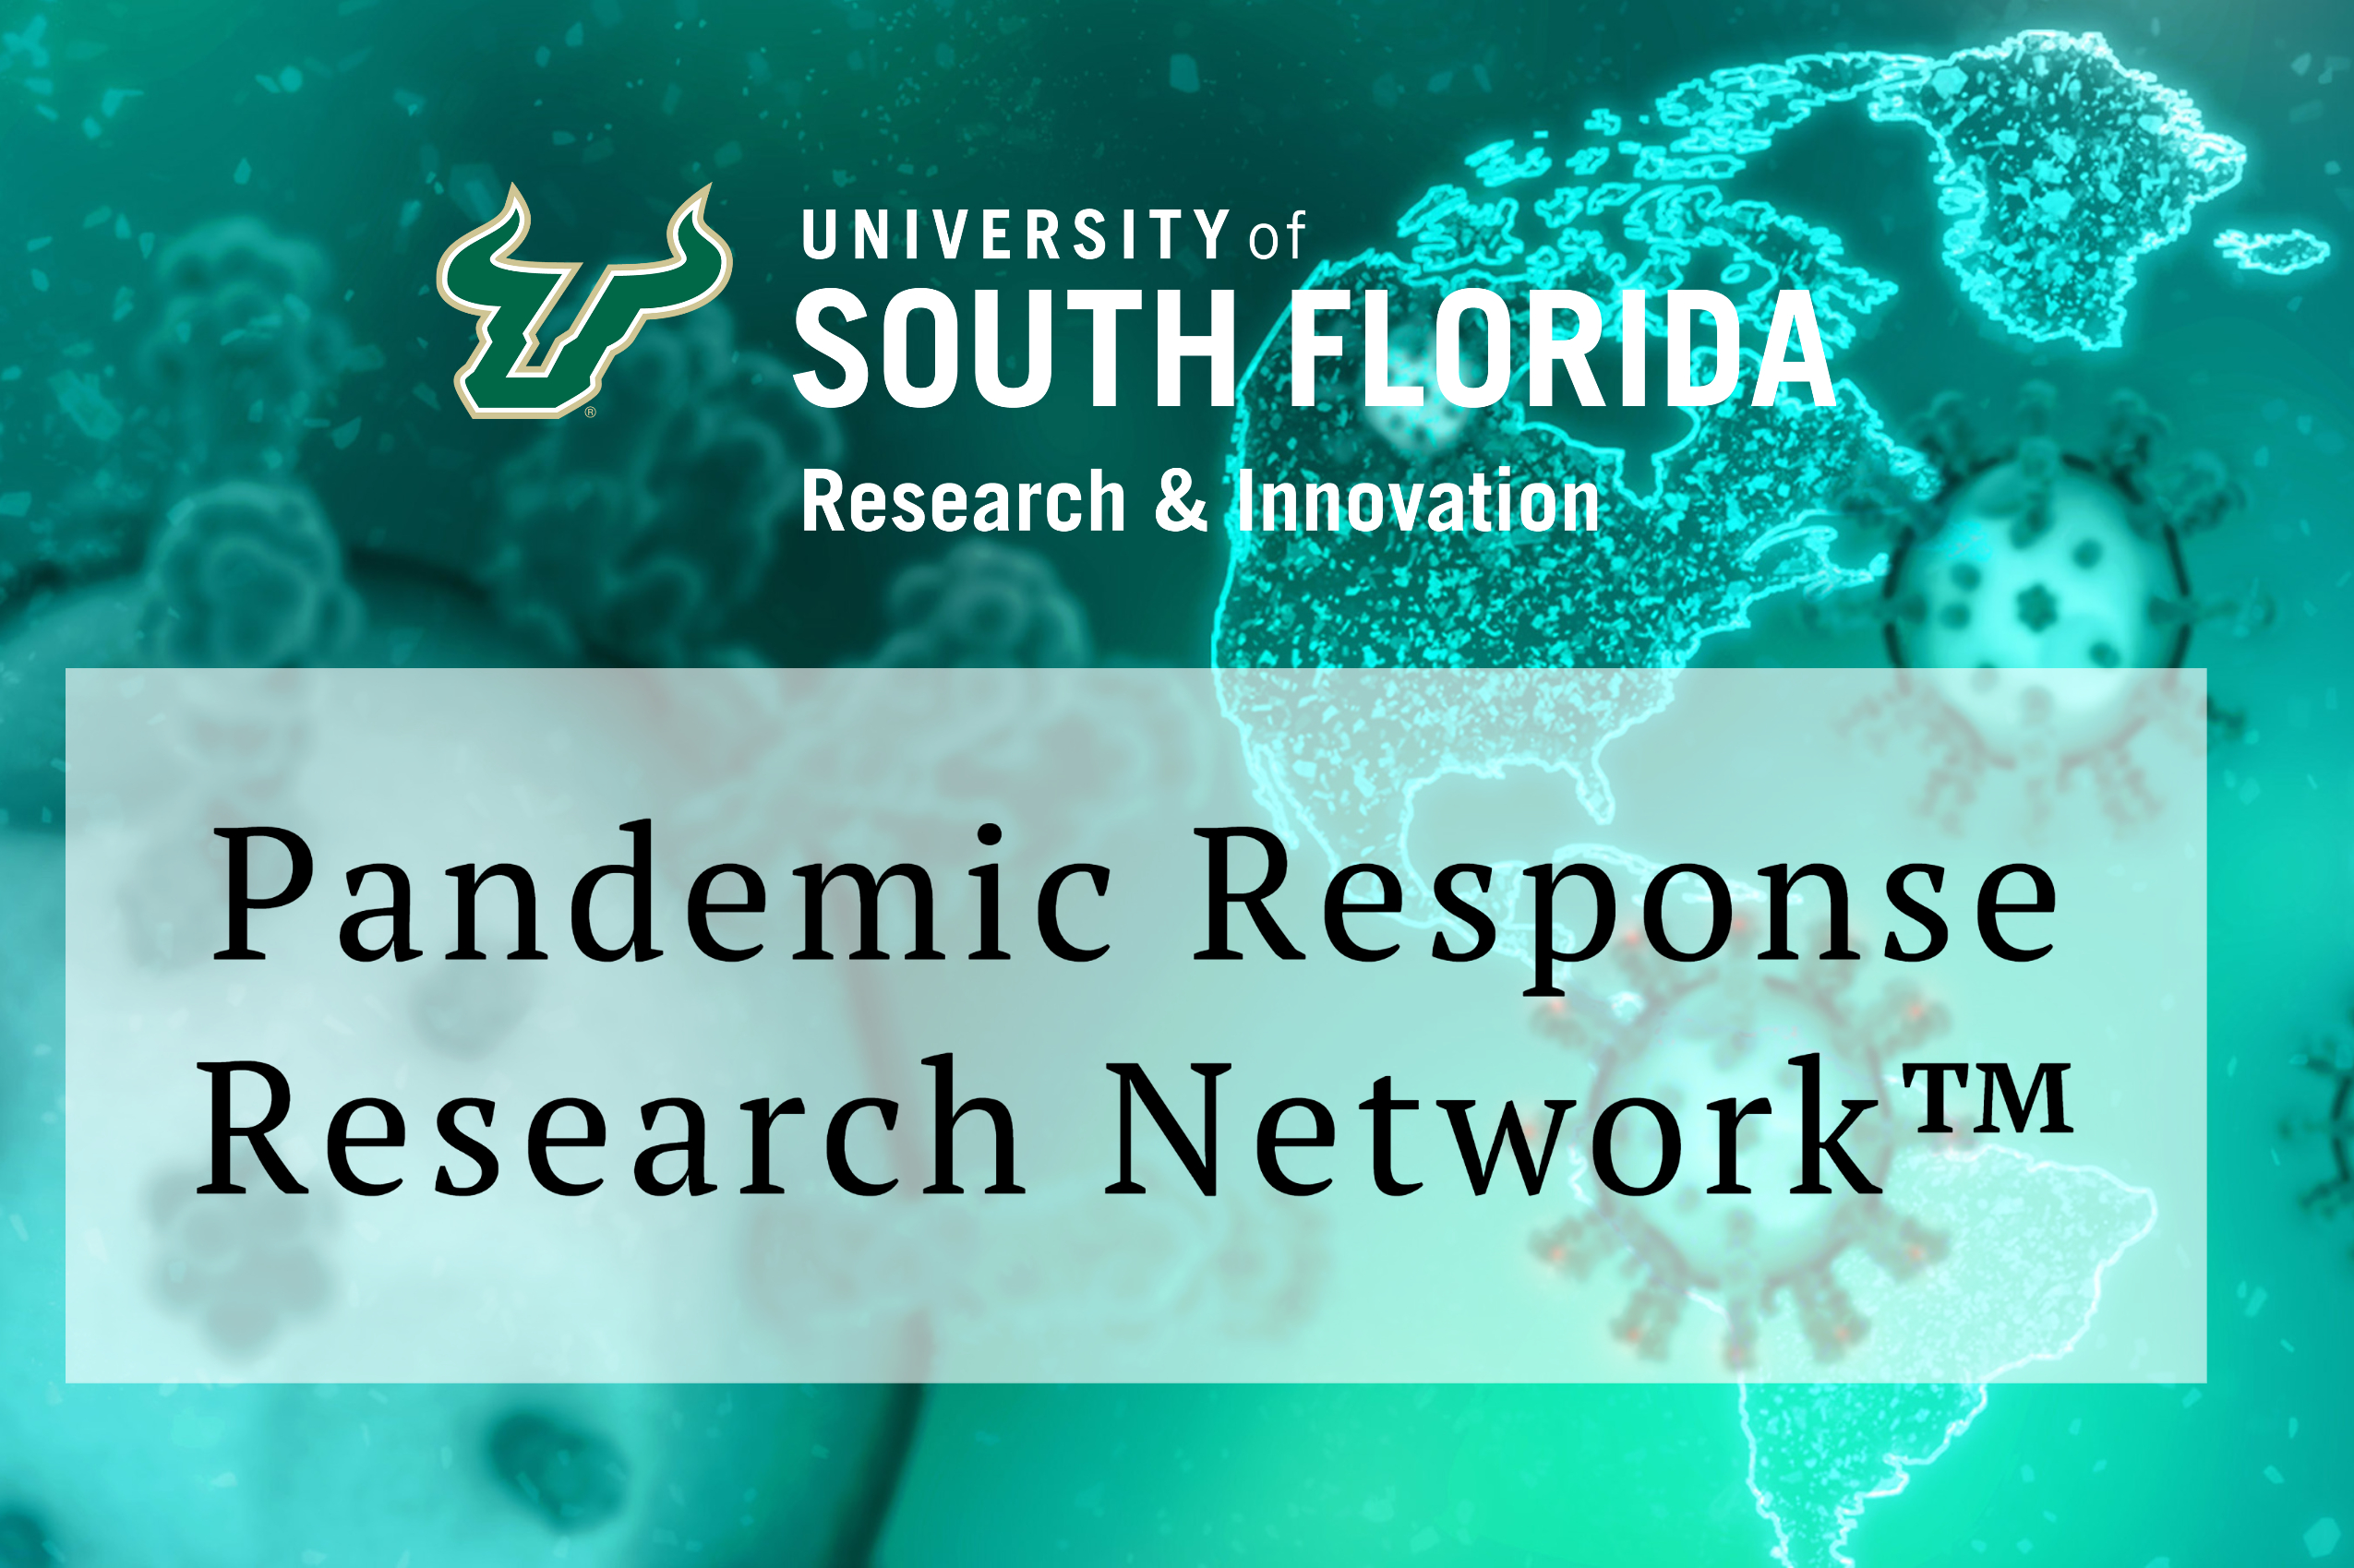 USF launches research task force to contribute to COVID-19 efforts